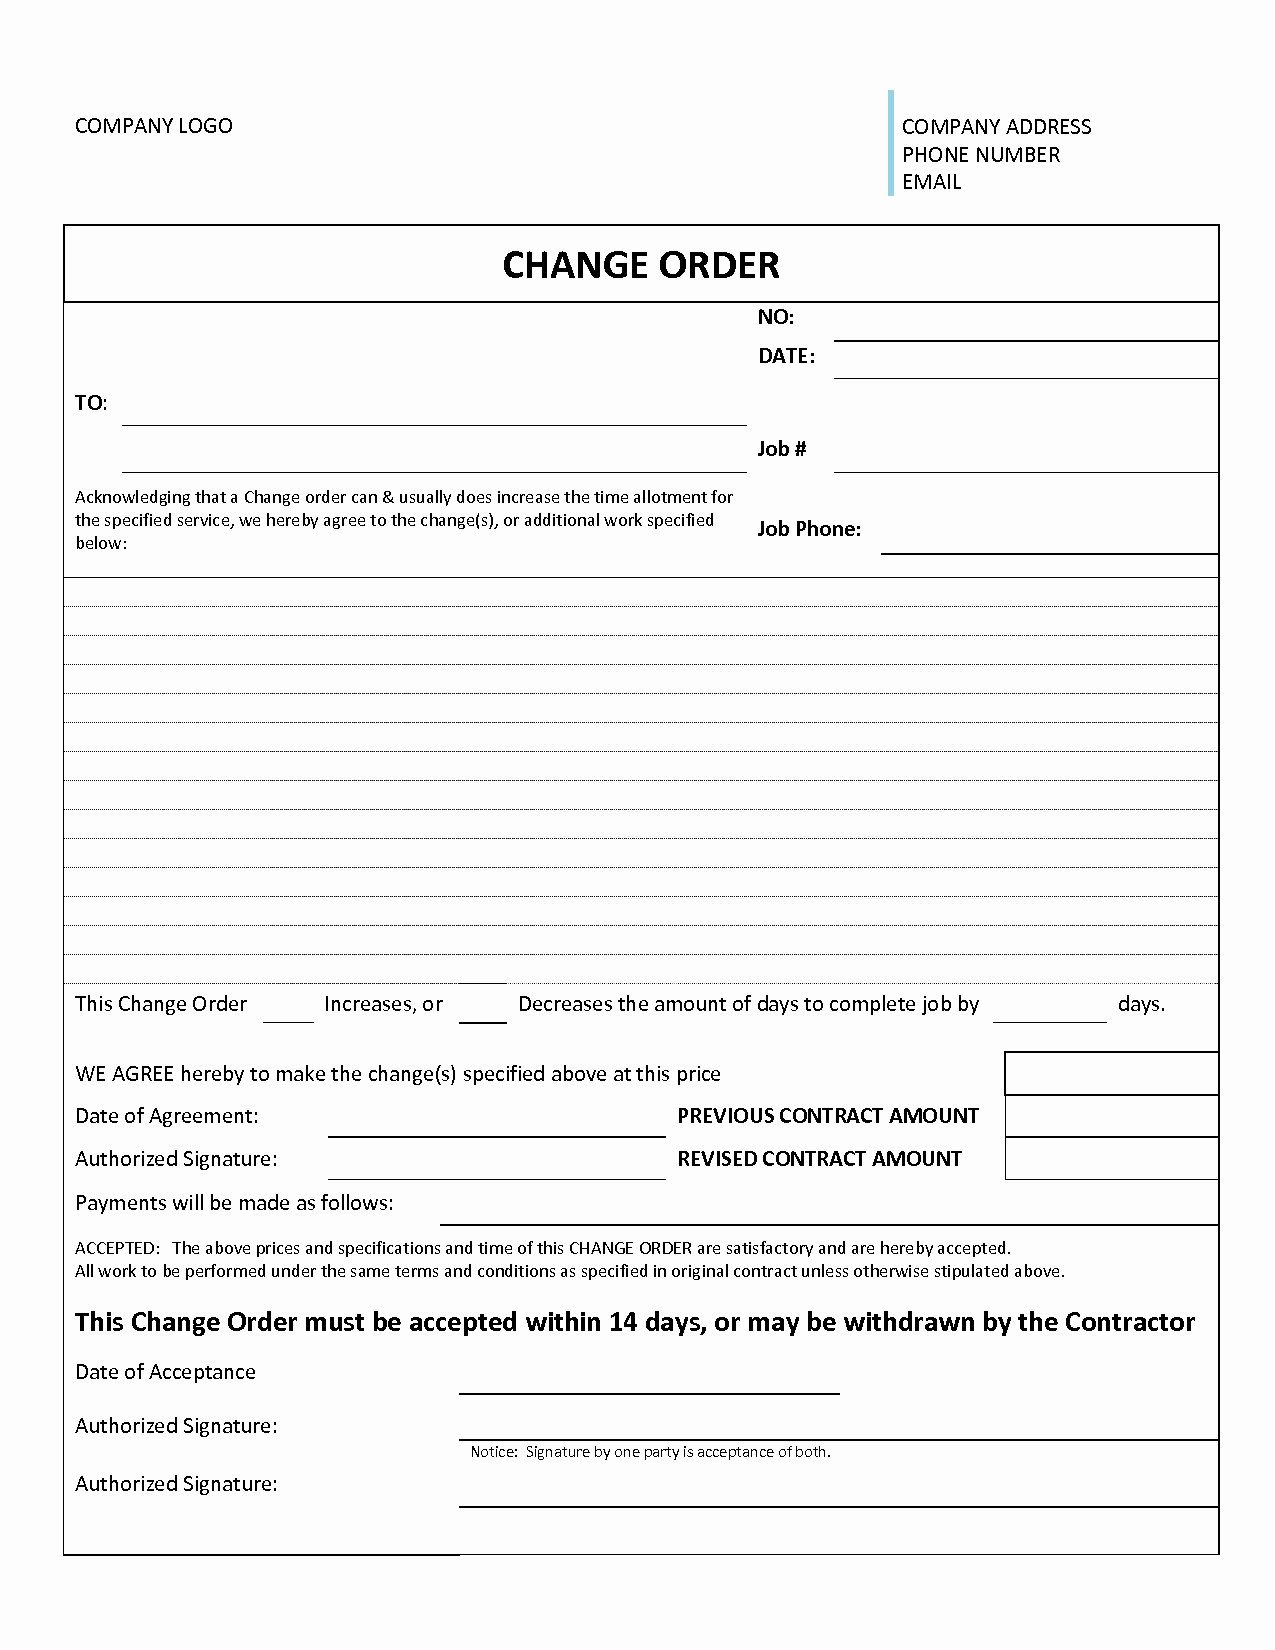 Special order form Template Inspirational Change order form Template